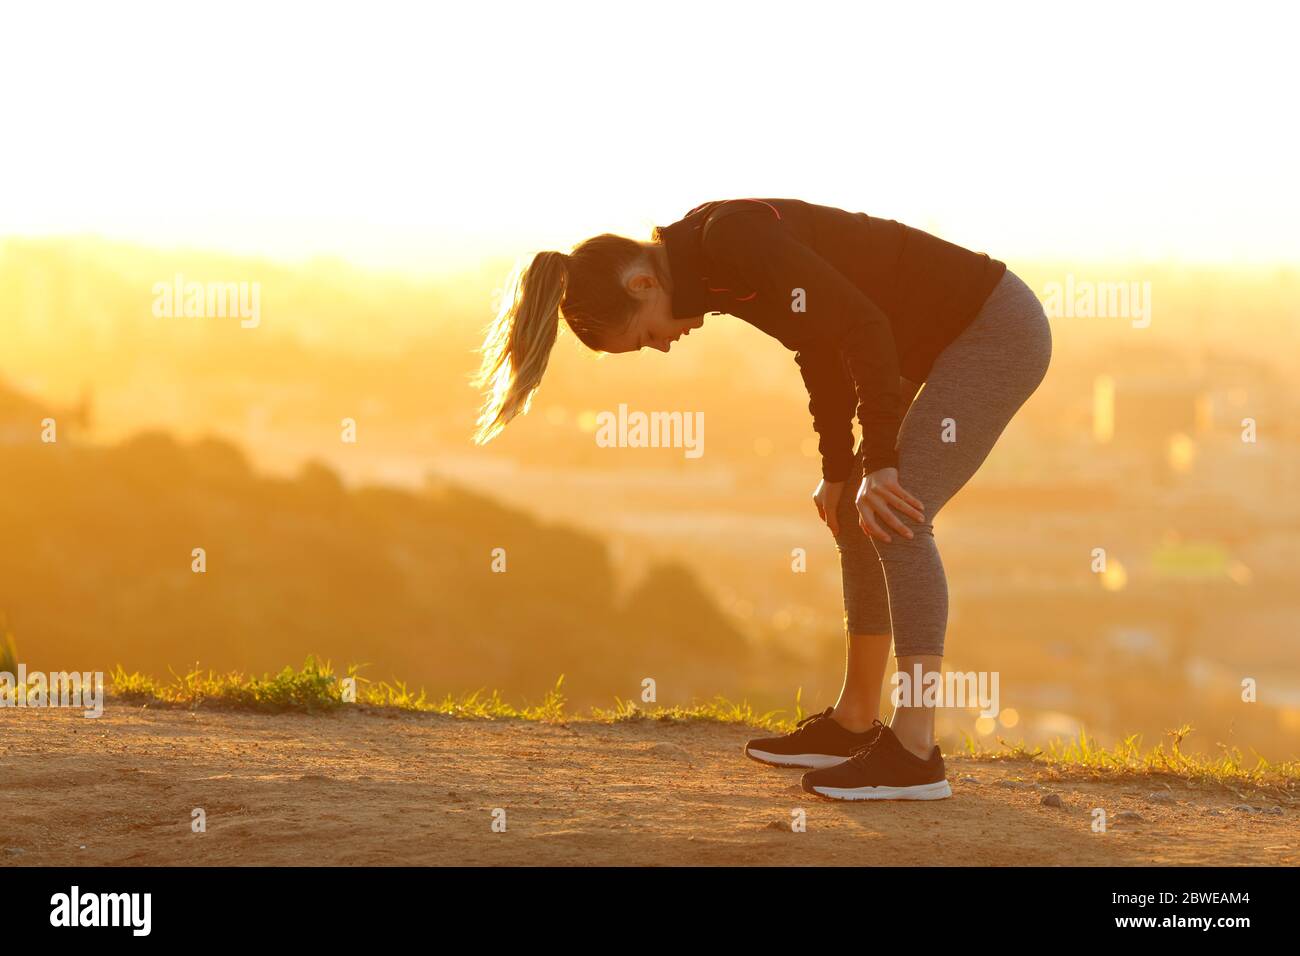 Side view portrait of a tired runner resting after exercise in city outskirts at sunset Stock Photo